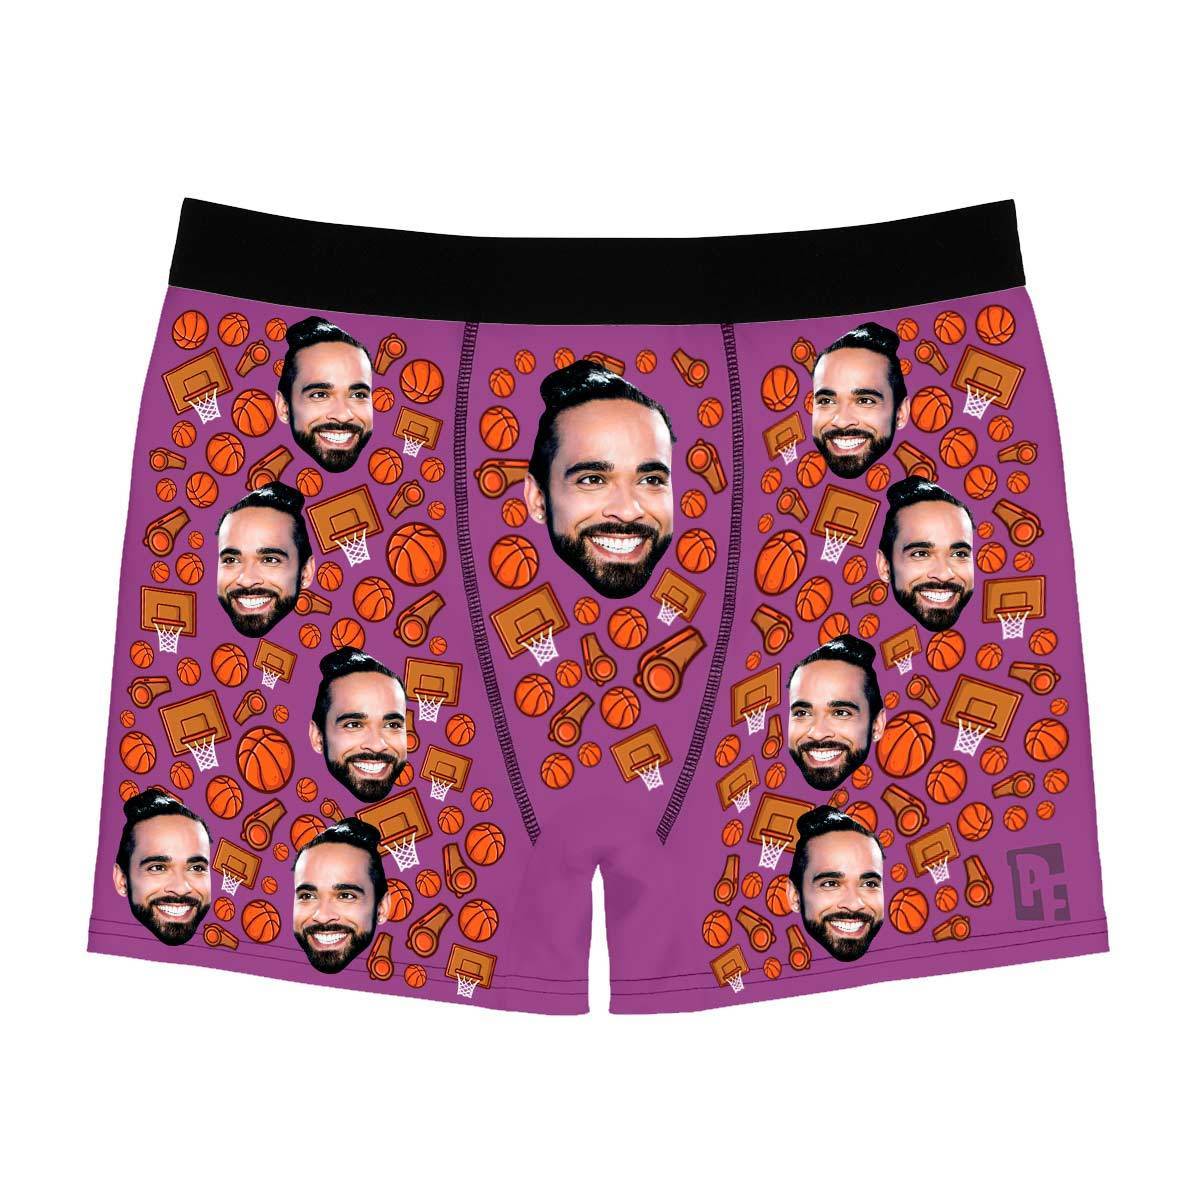 Purple Basketball men's boxer briefs personalized with photo printed on them